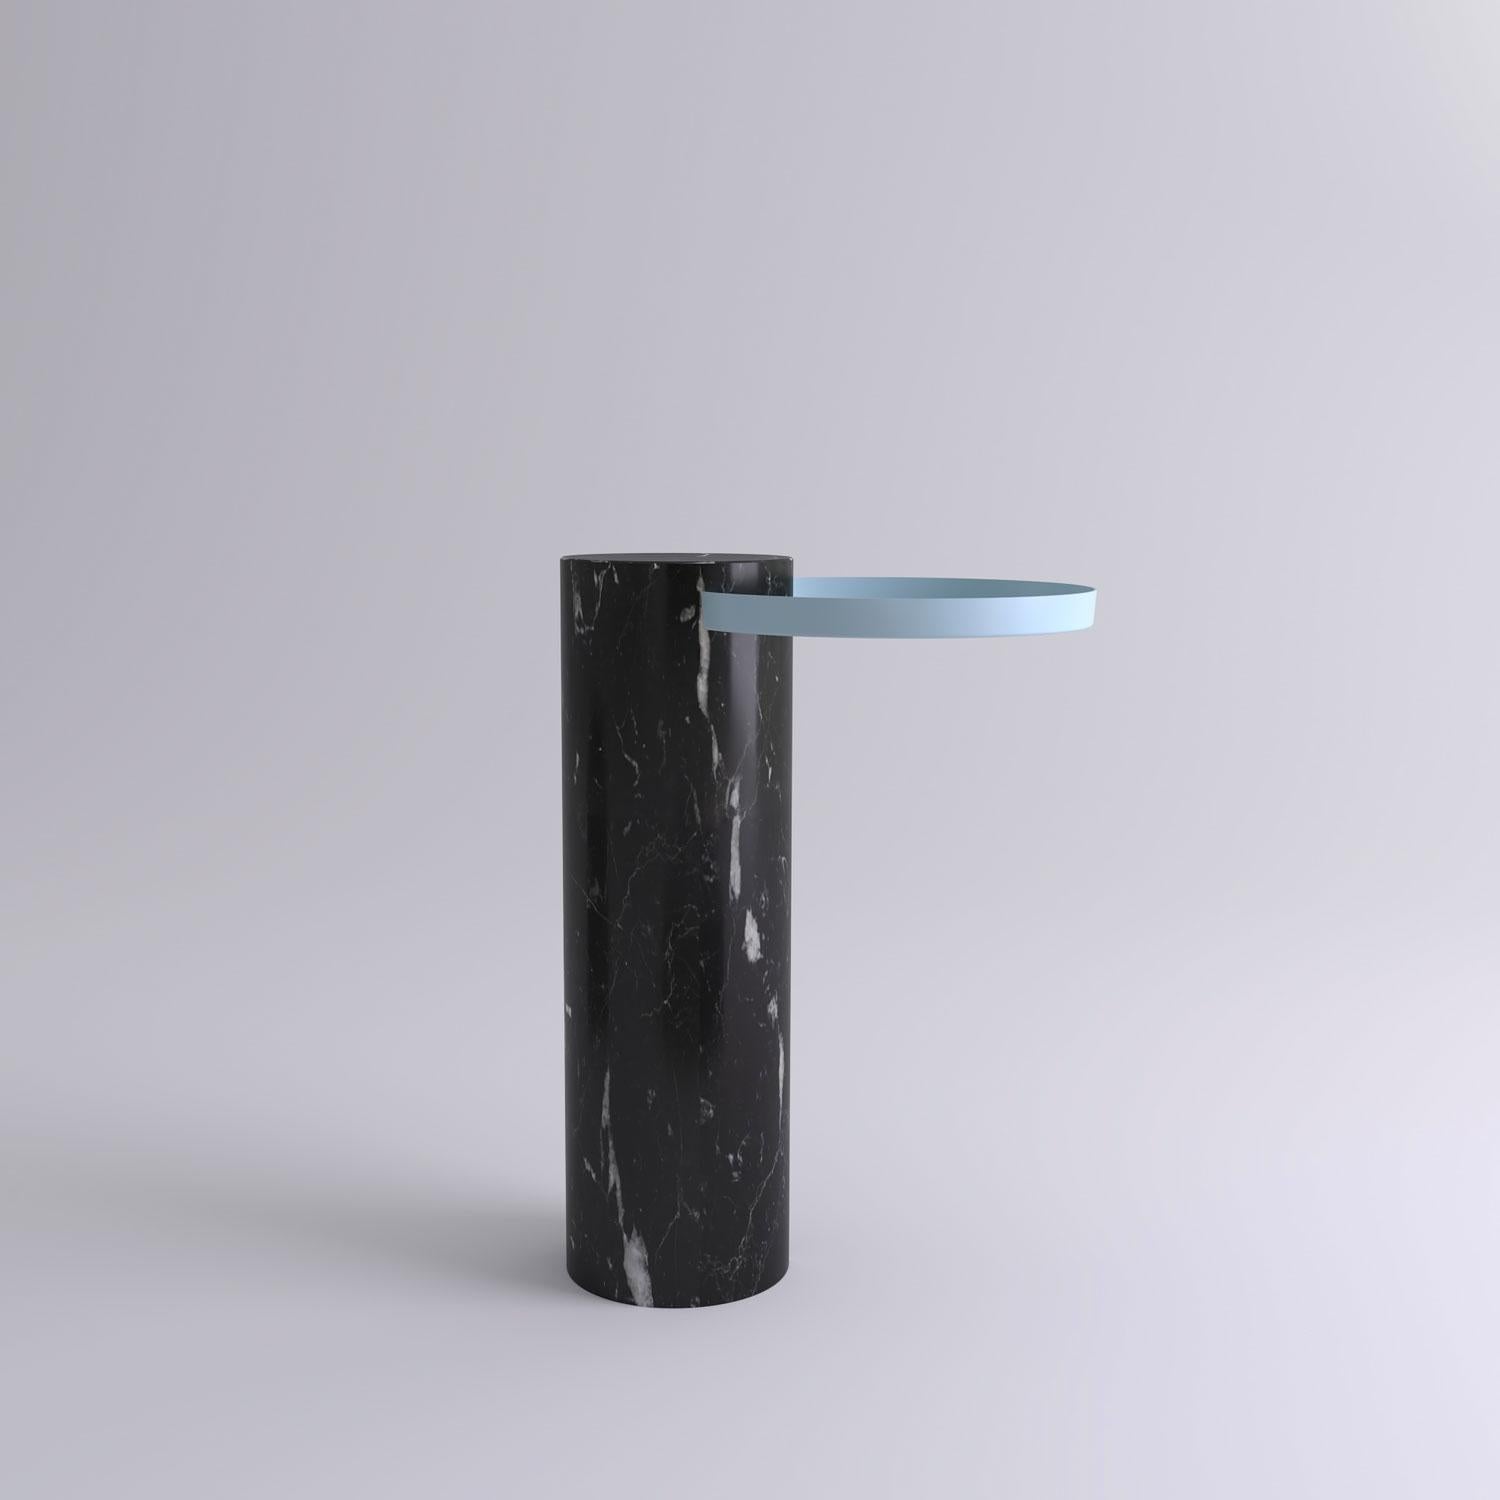 High black marquina marble contemporary guéridon, Sebastian Herkner
Dimensions: D 42 x H 57 cm
Materials: Black Marquina marble, light blue metal tray

The salute table exists in 3 sizes, 4 different marble stones for the column and 5 different